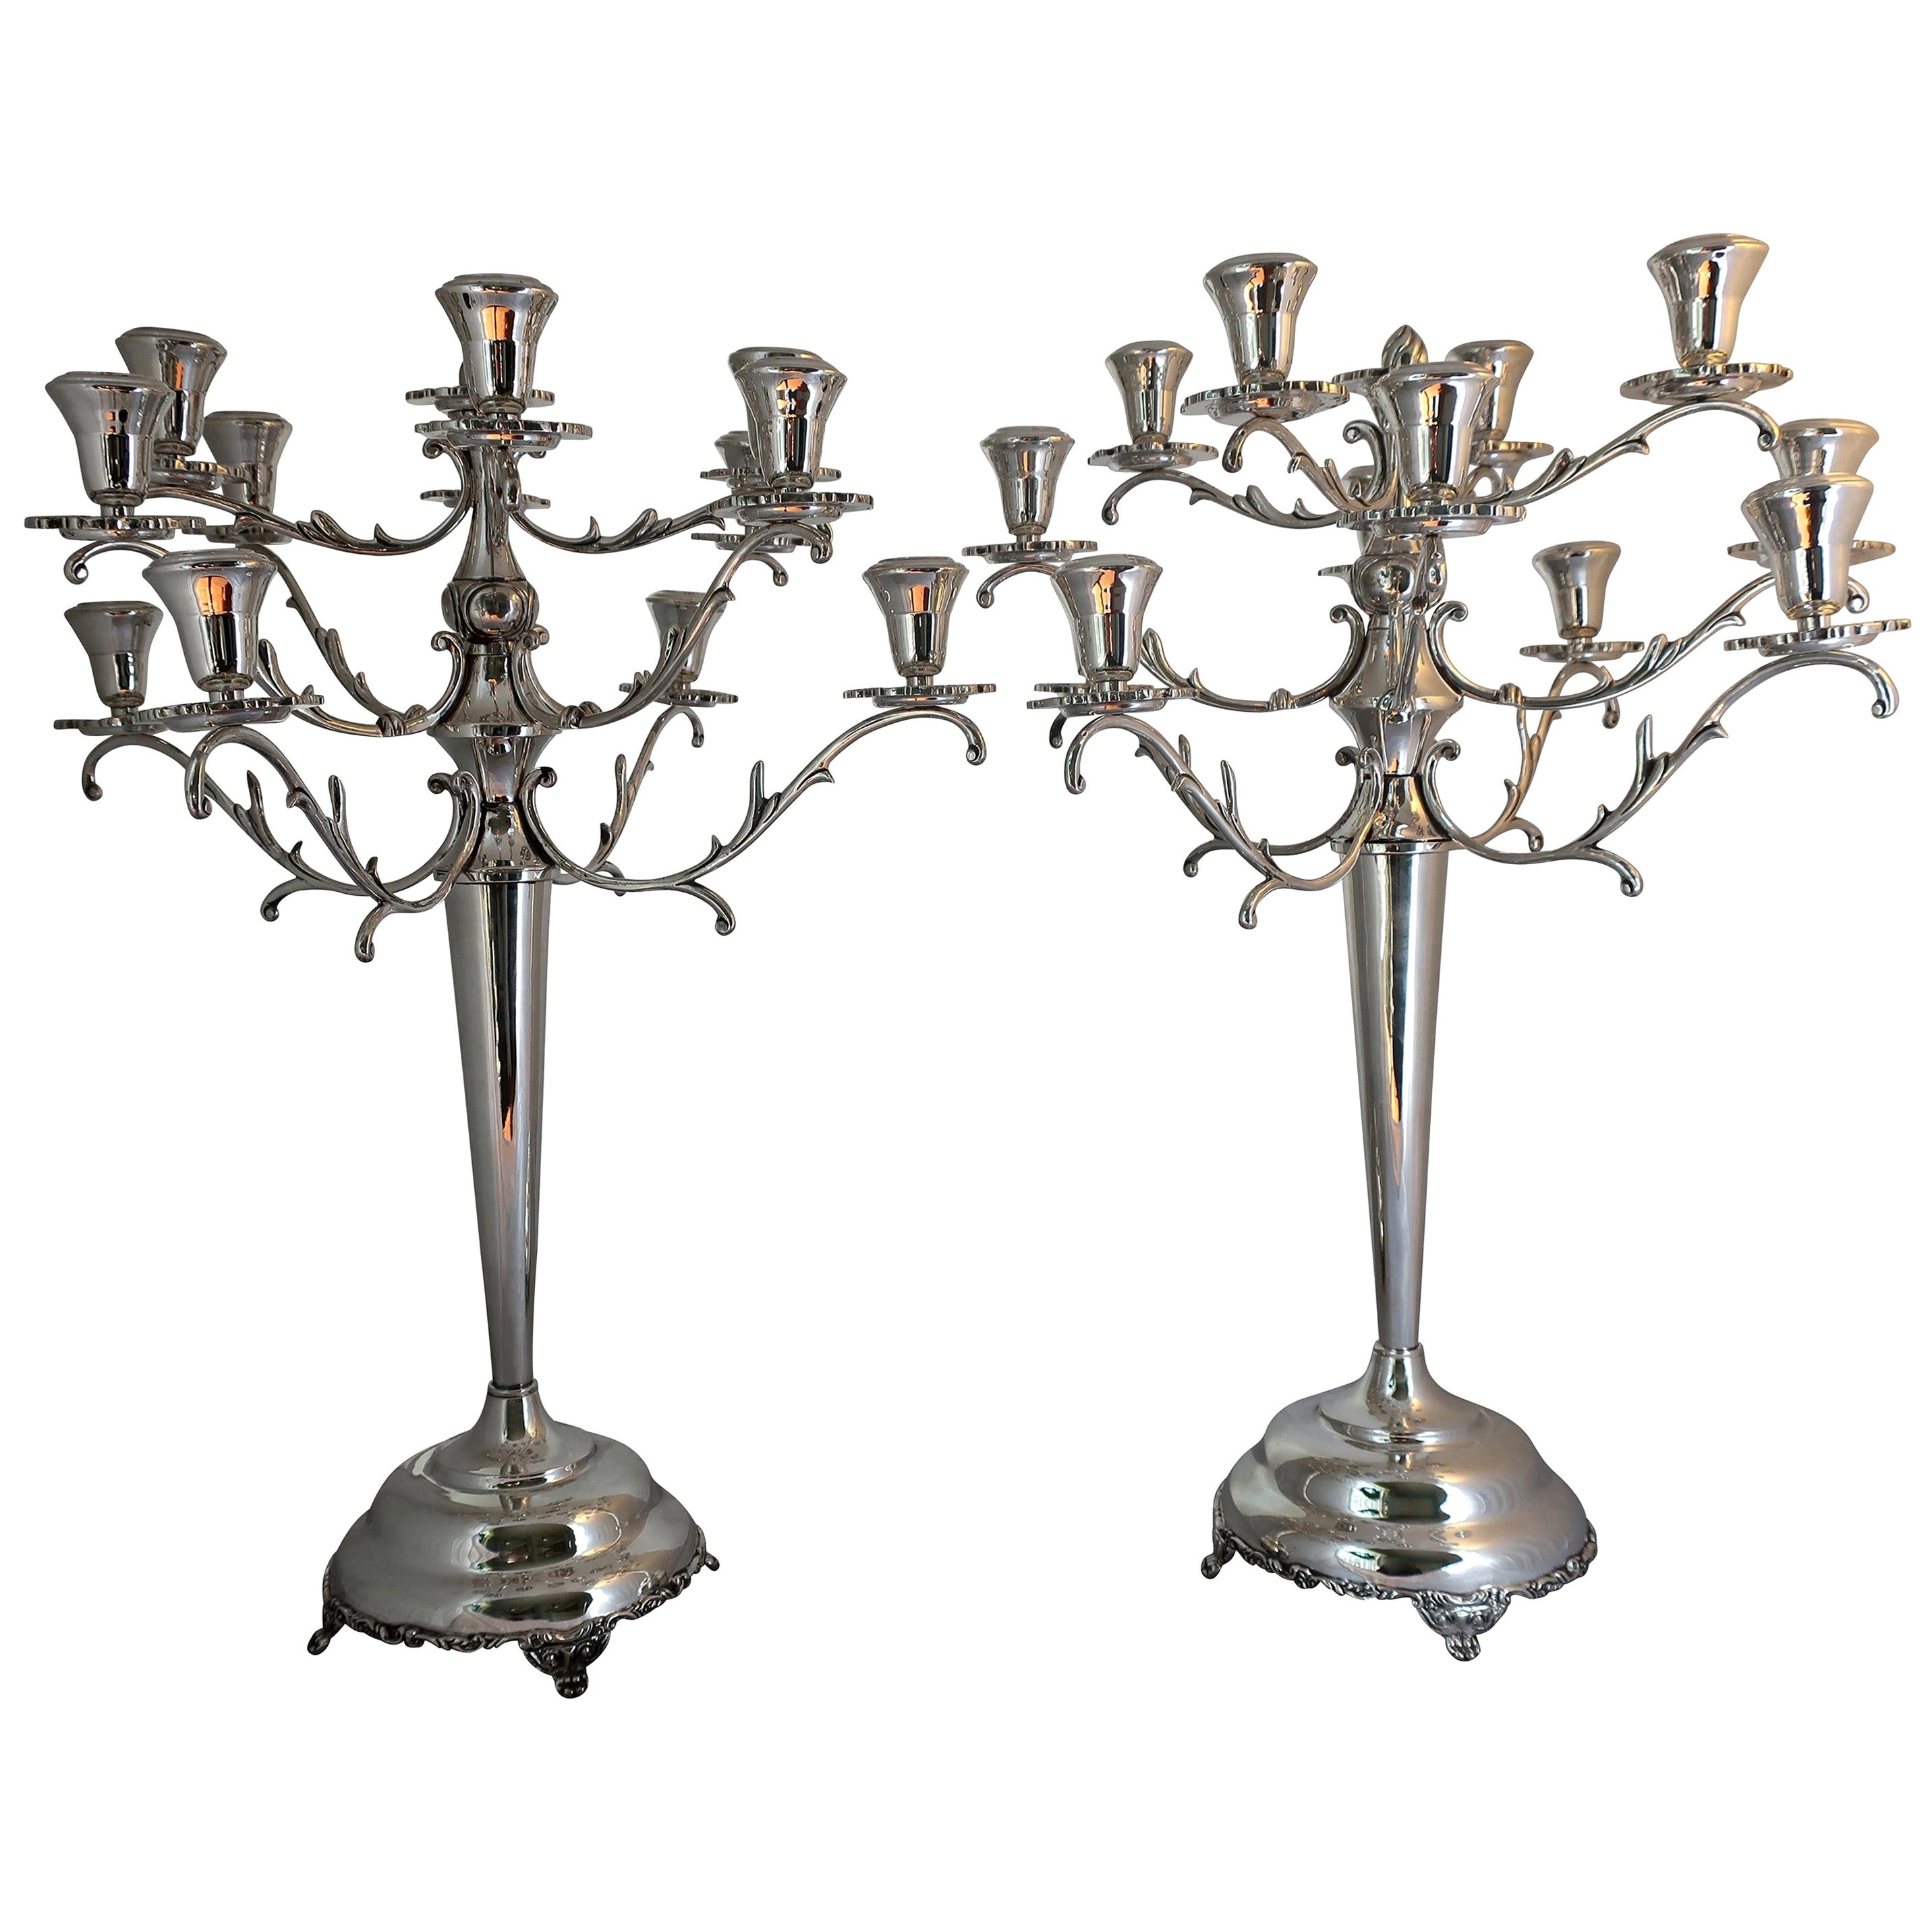 19th Century Mexican Sterling Silver Twelve-Arm Candelabra For Sale